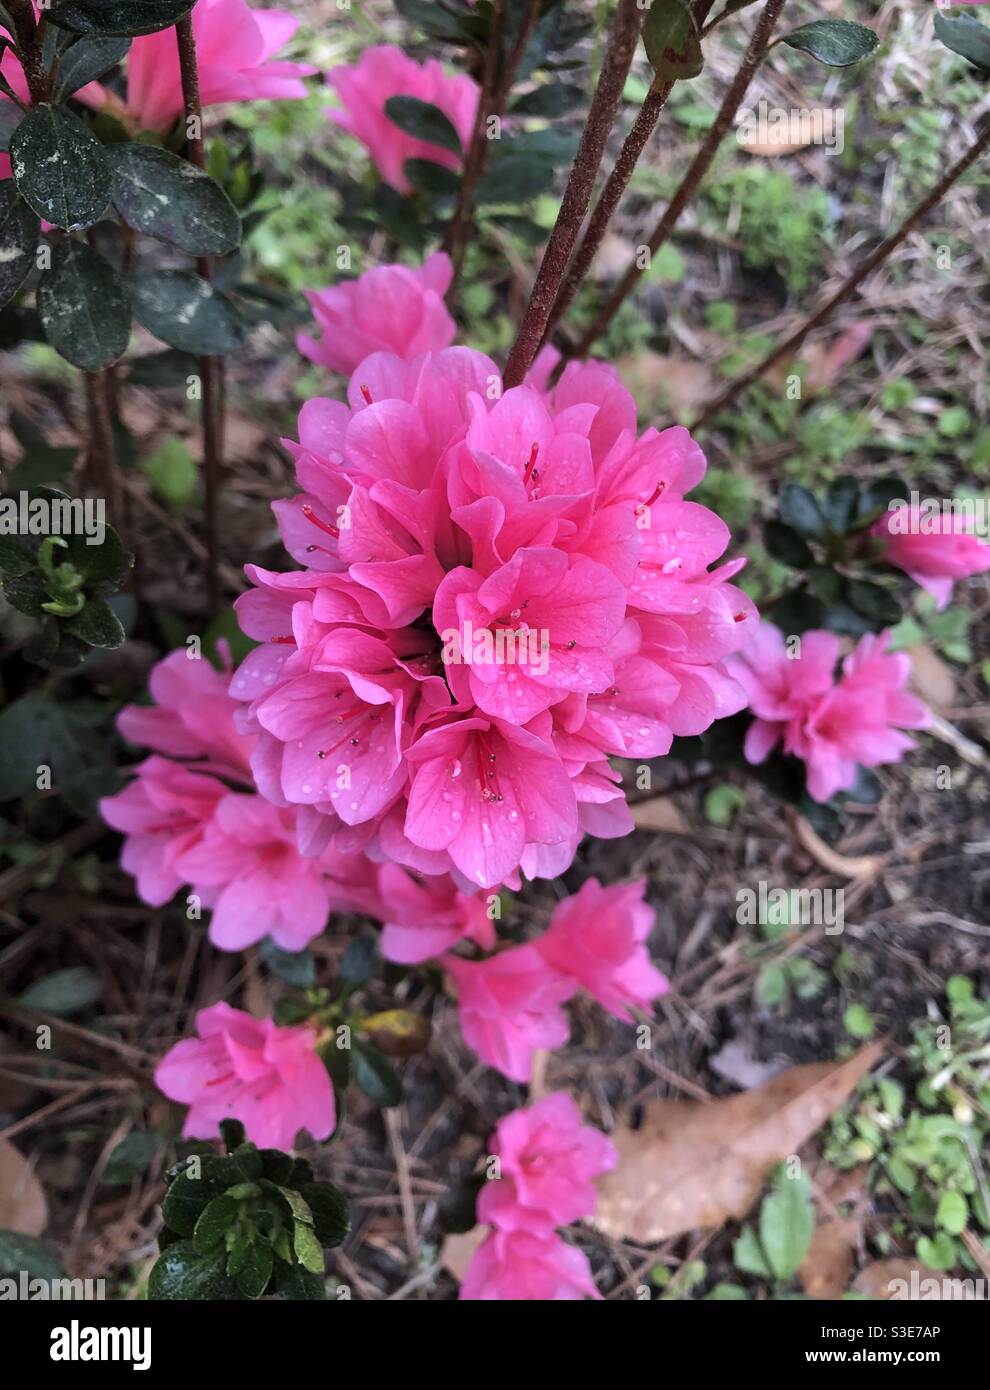 Cluster of pink flowers on azalea bush with raindrops from gentle spring showers Stock Photo